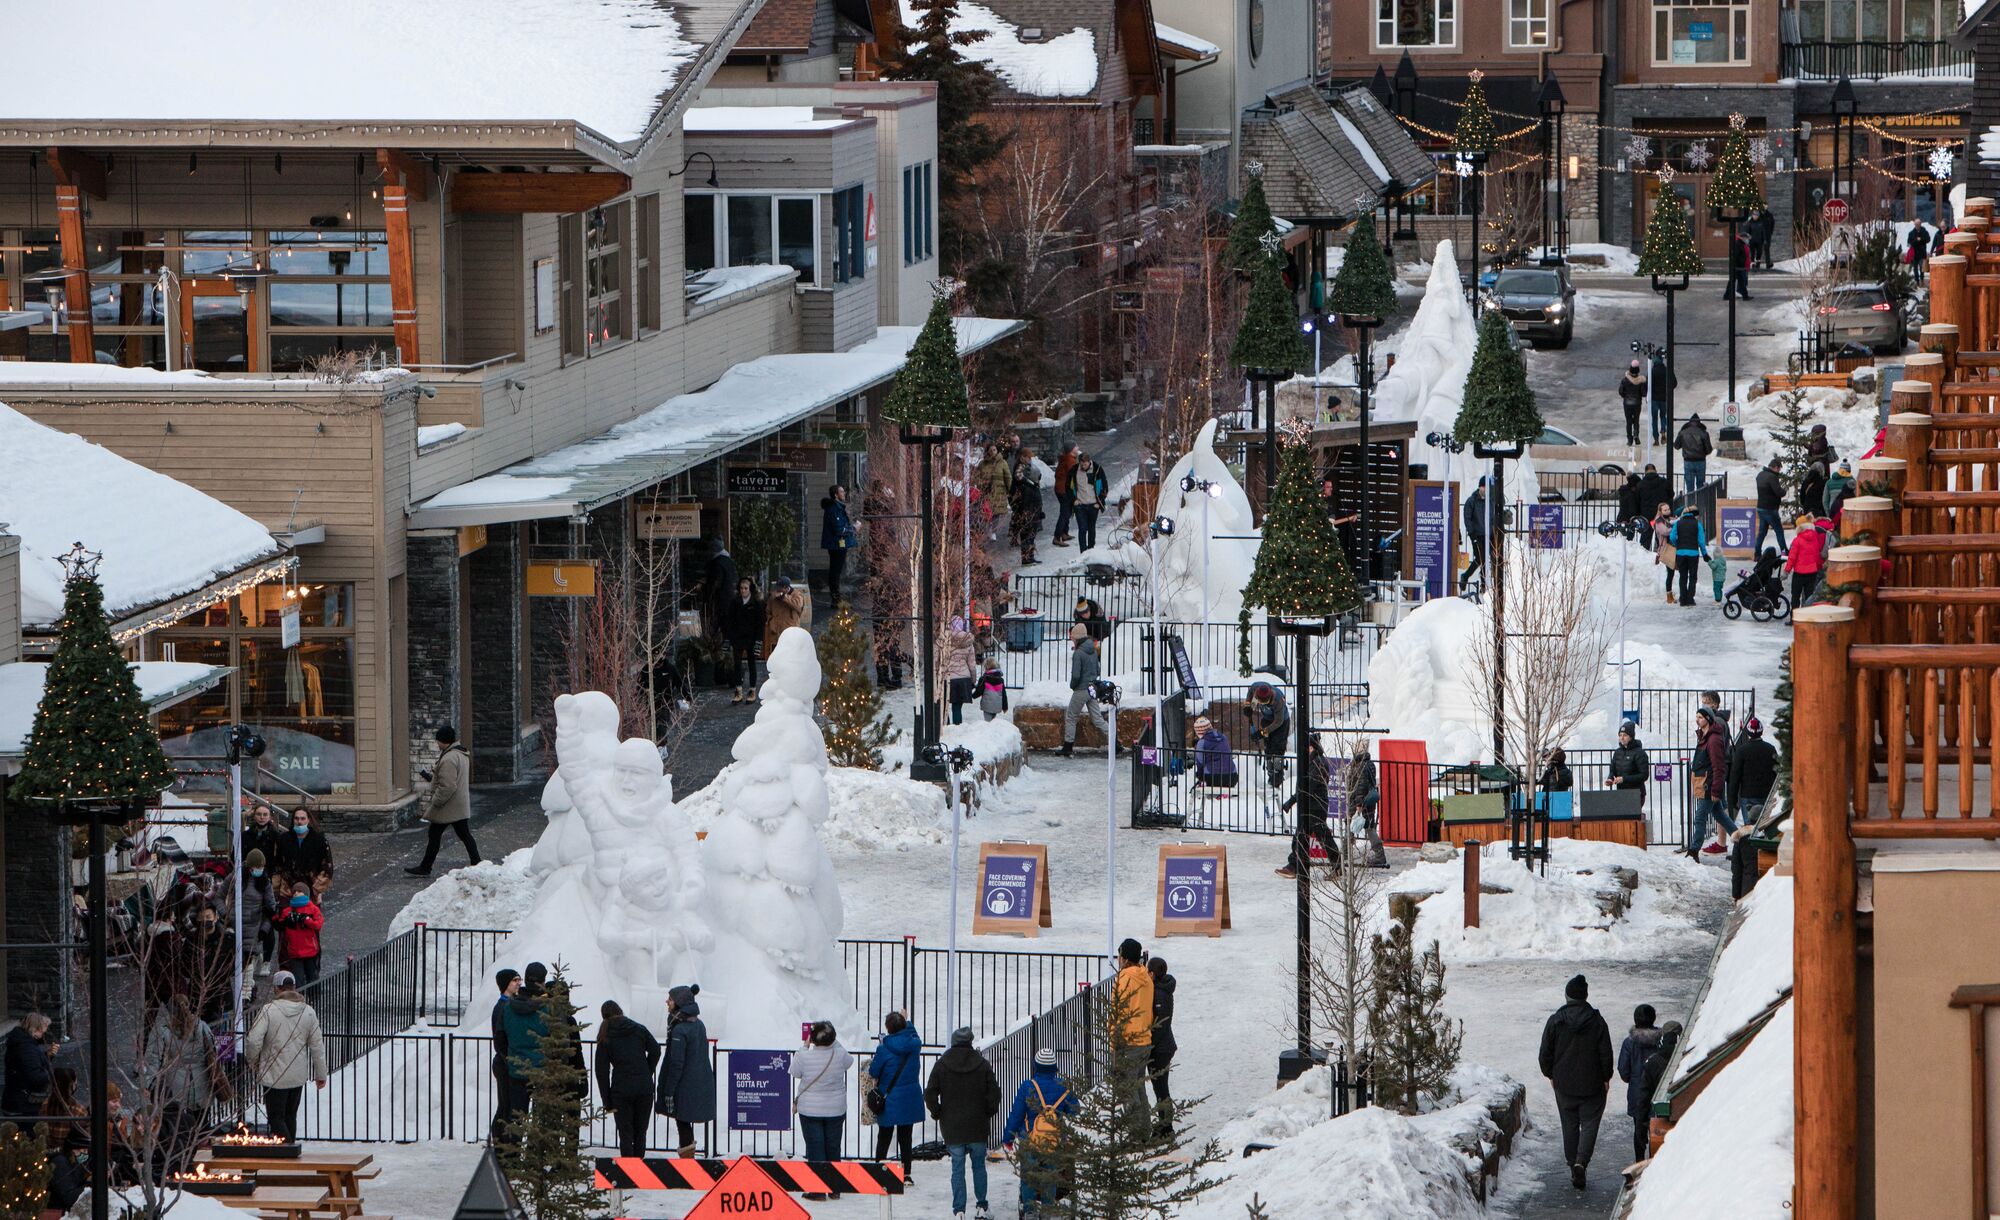 The snow sculpture exhibition at Bear Street during SnowDays Festival 2022 in Banff National Park. 